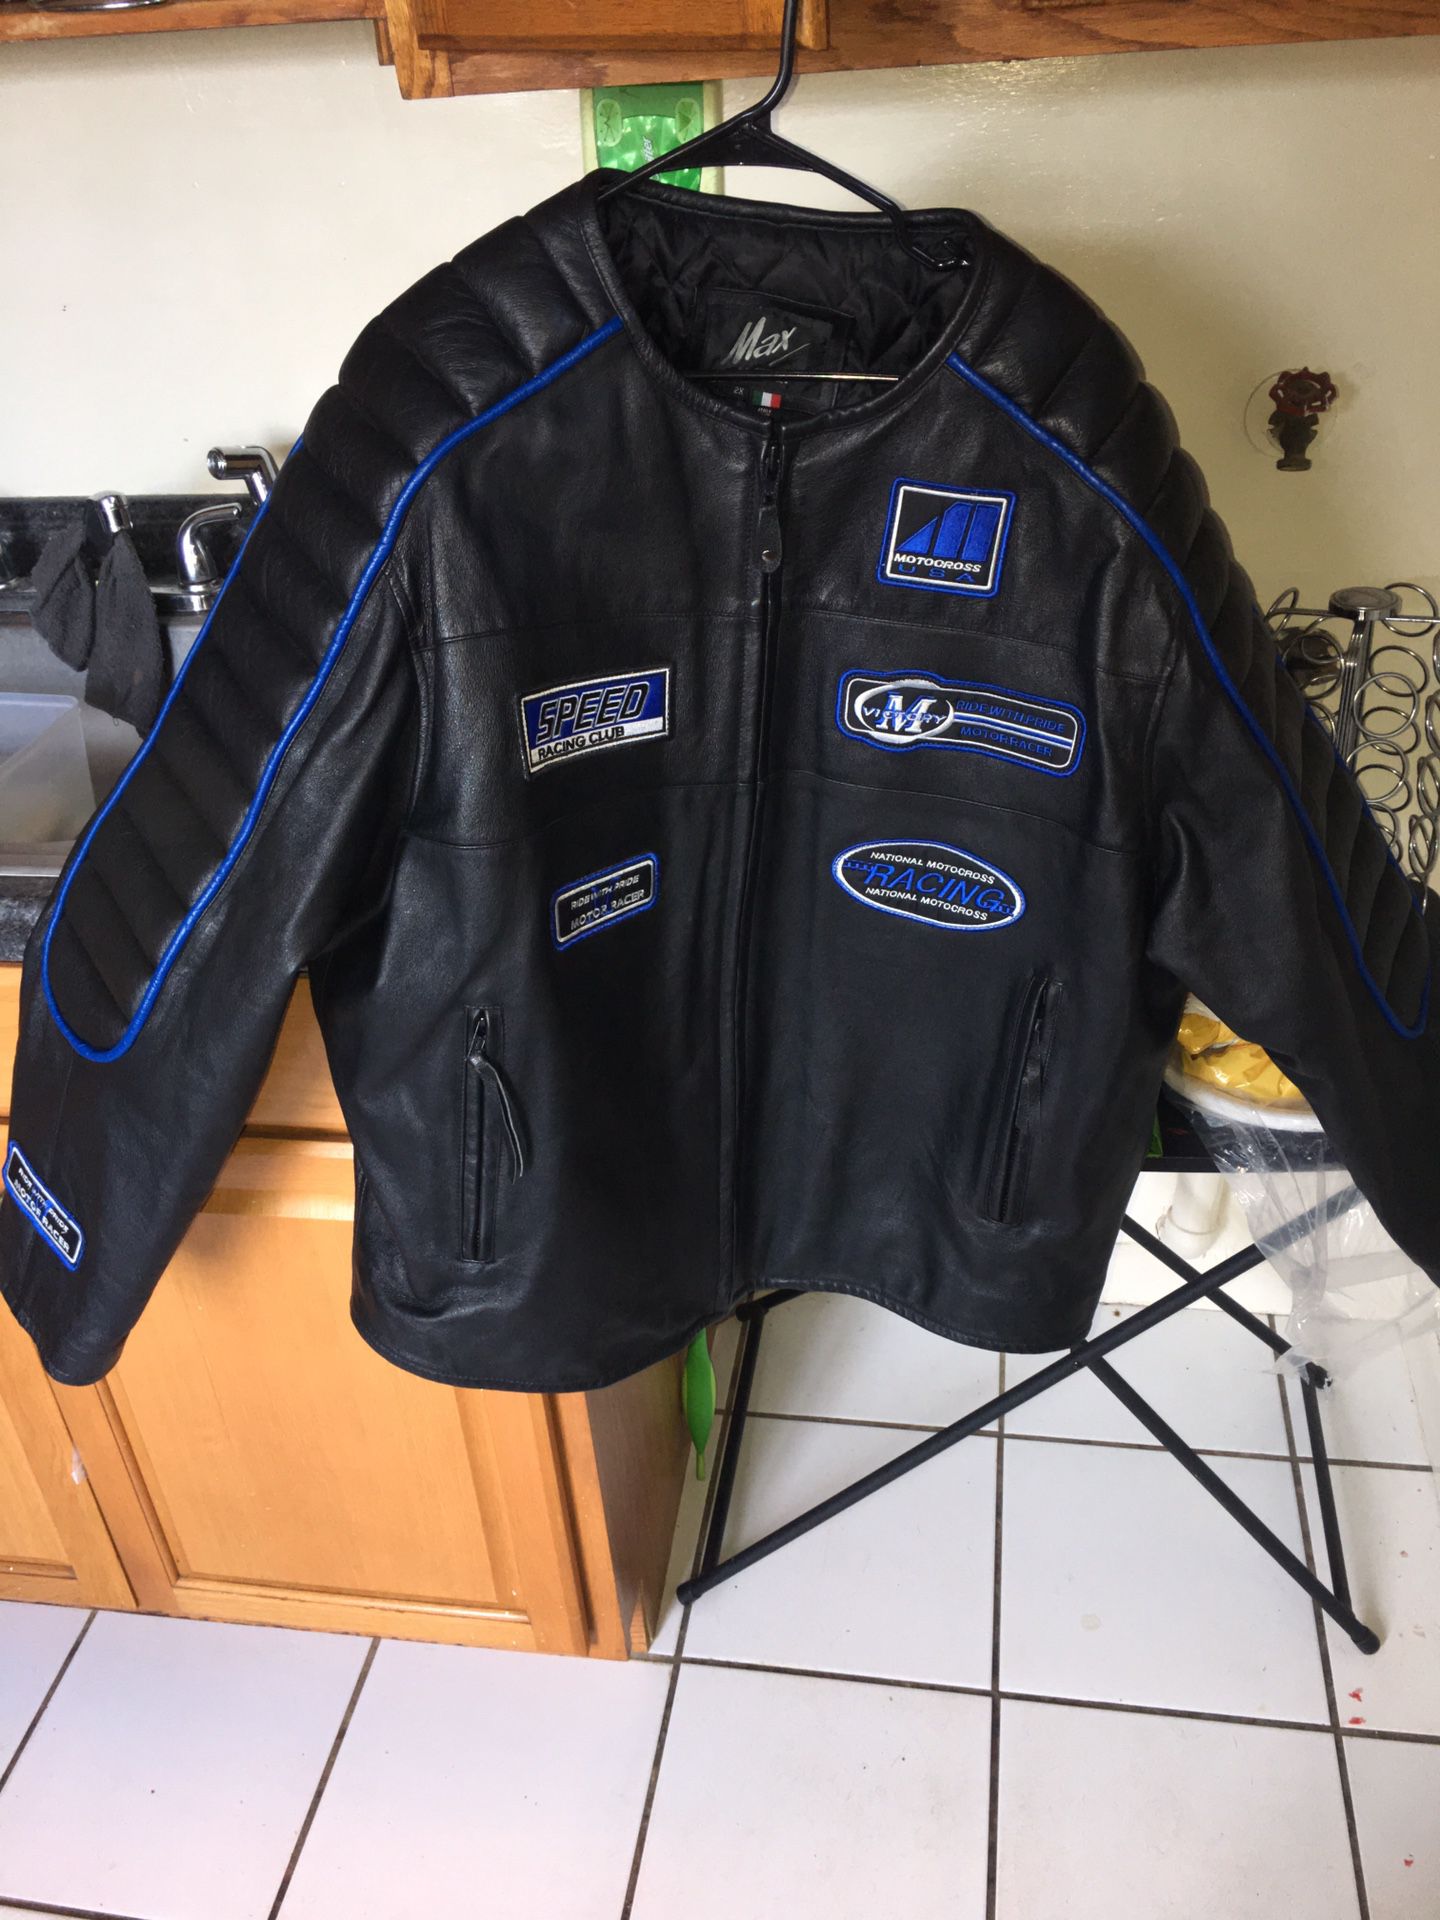 Genuine leather 2xl motorcycle jacket in great condition